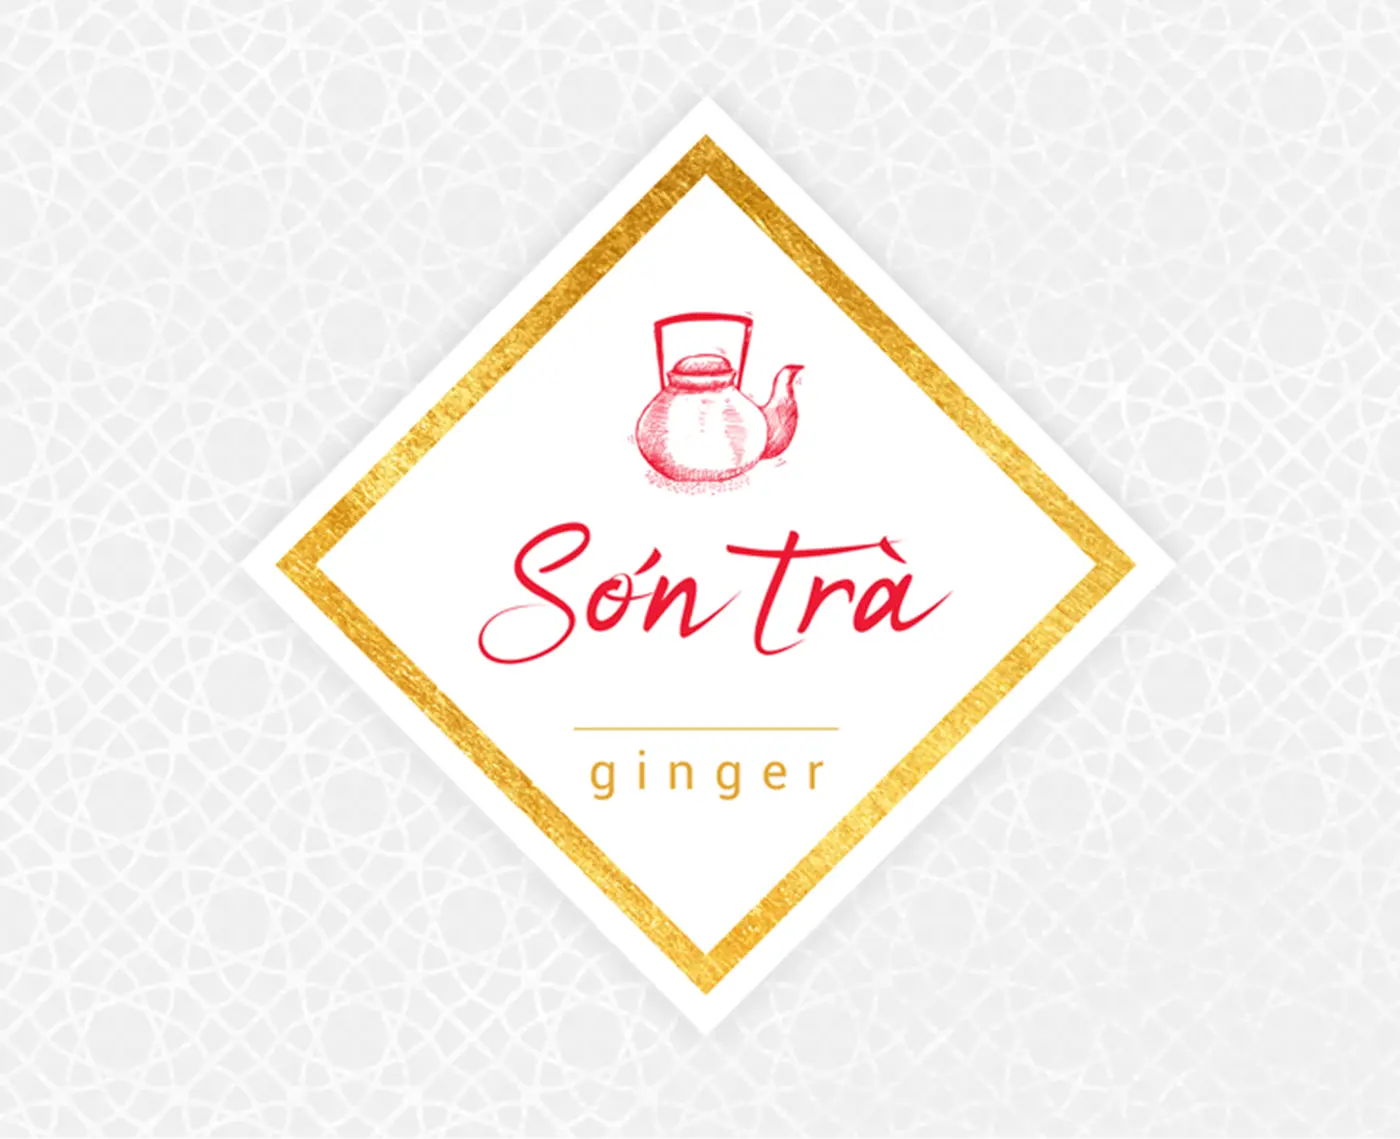 Son Tra logo with a teapot and gold lettering